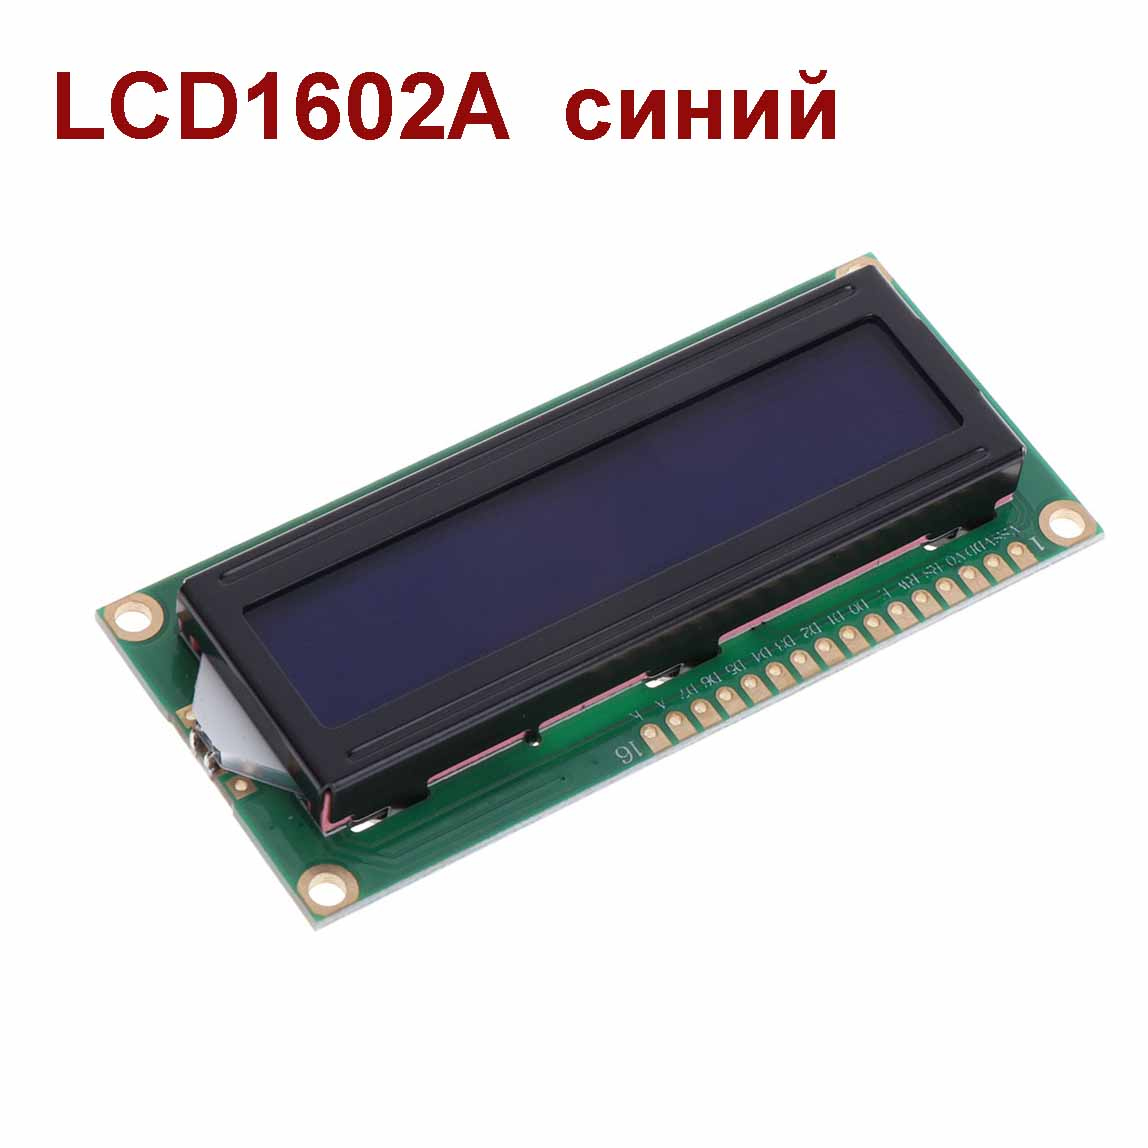 LCD1602A